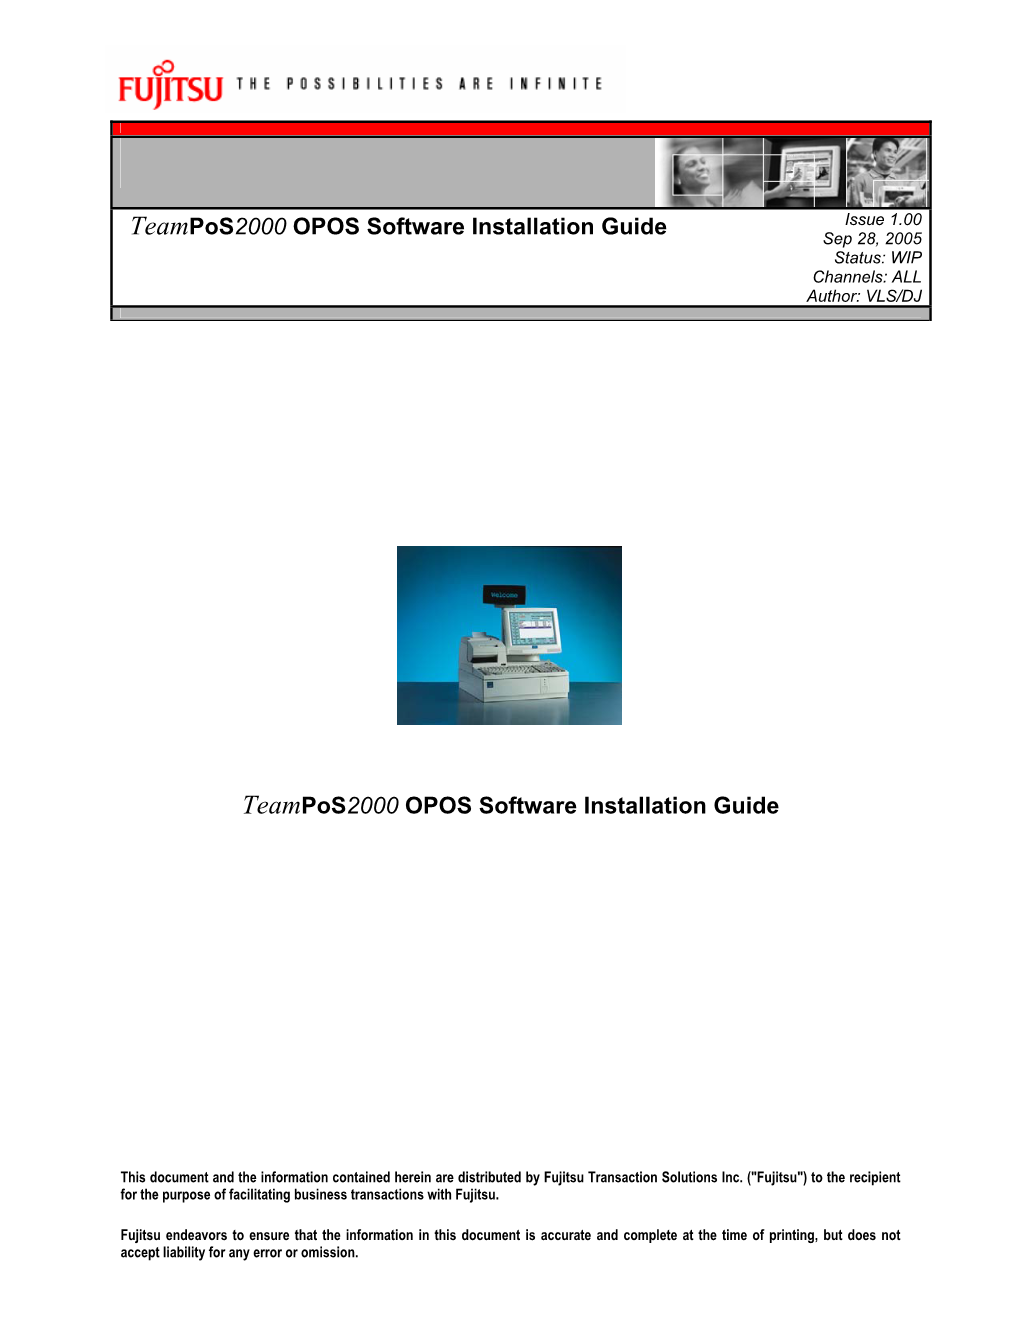 Teampos2000 OPOS Software Installation Guide